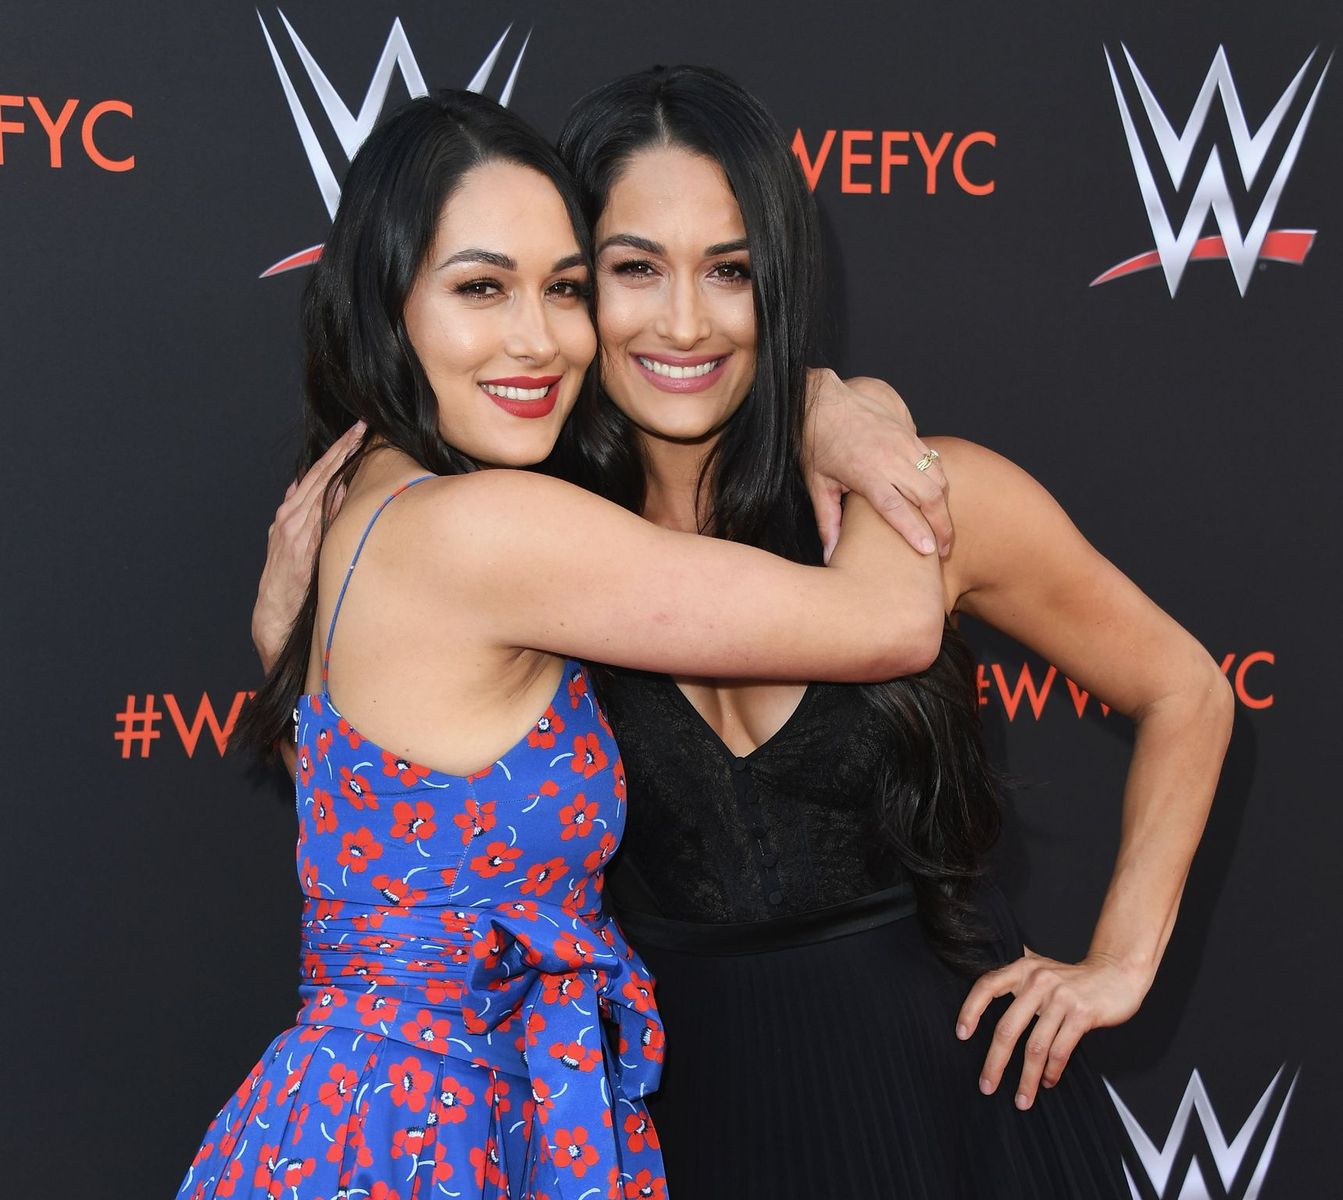 Brie and Nikki Bella at WWE's first-ever Emmy "For Your Consideration" event on June 6, 2018 | Photo: Getty Images